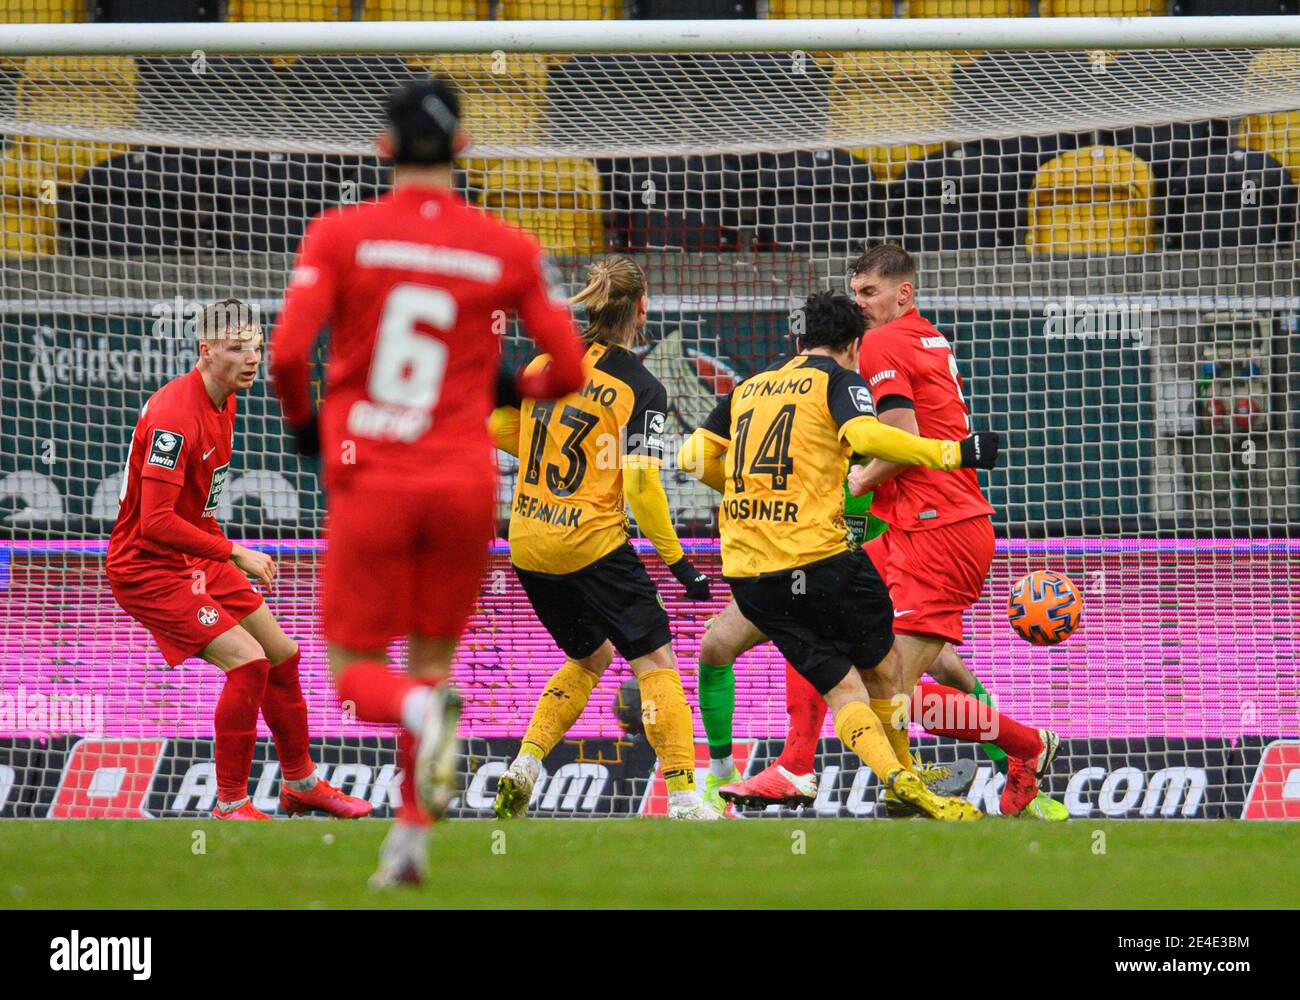 Dresden, Germany. 23rd Jan, 2021. Football: 3. league, SG Dresden - 1. FC Kaiserslautern, 20. matchday, at Rudolf-Harbig-Stadion. Dynamo's Philipp Hosiner (2nd from right) scores the goal to make it 2:1.